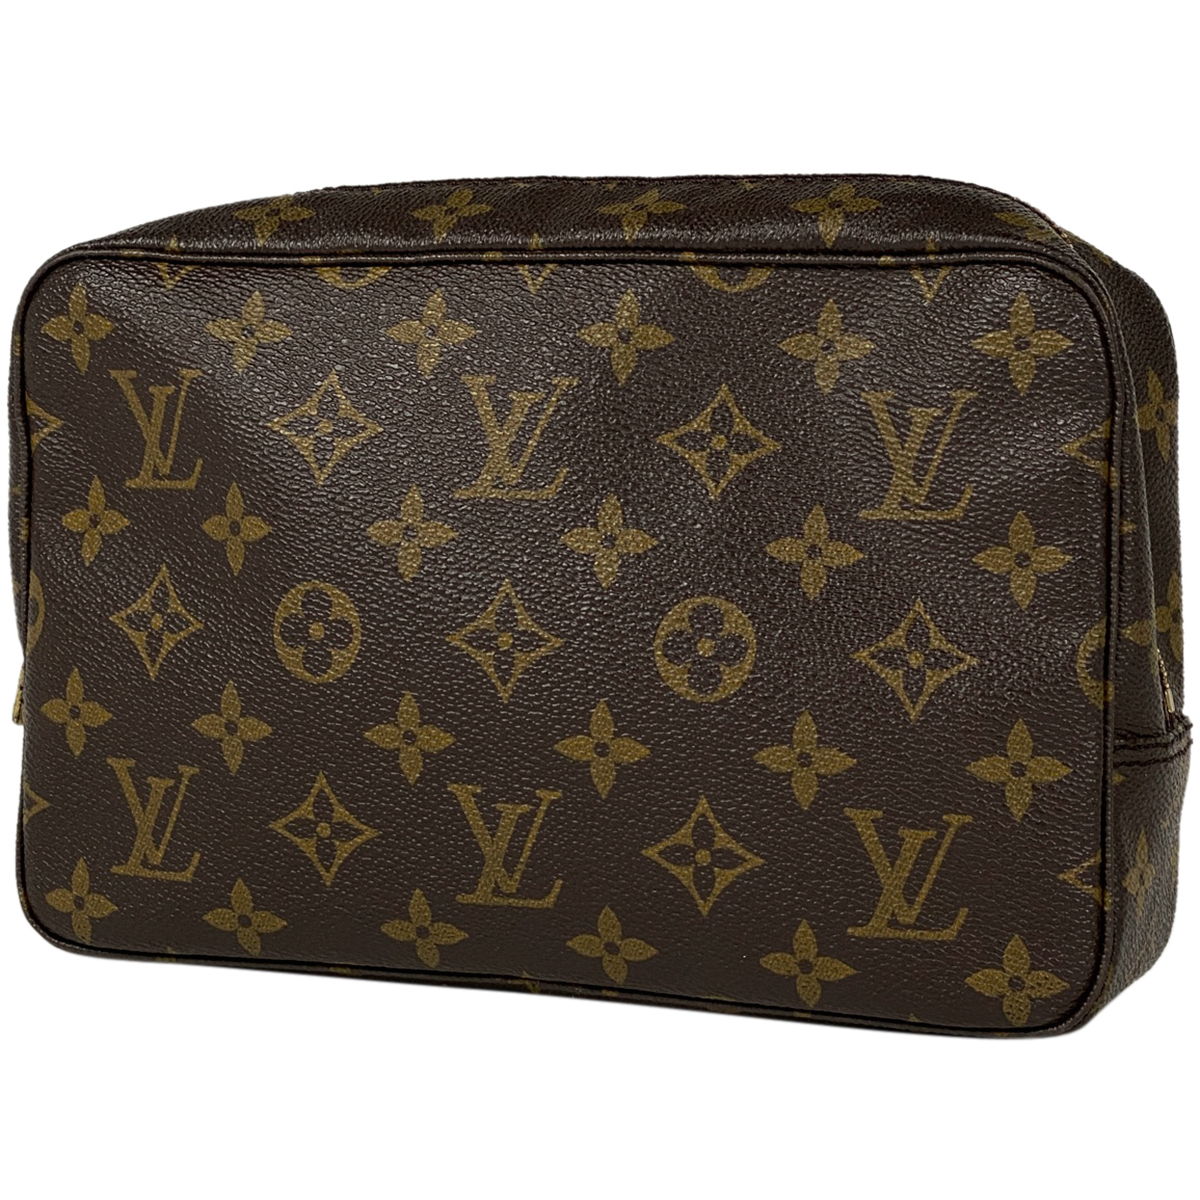  Louis * Vuitton Louis Vuittontu loose towa let 23 make-up cosme second bag make-up pouch monogram Brown M47524 lady's used 